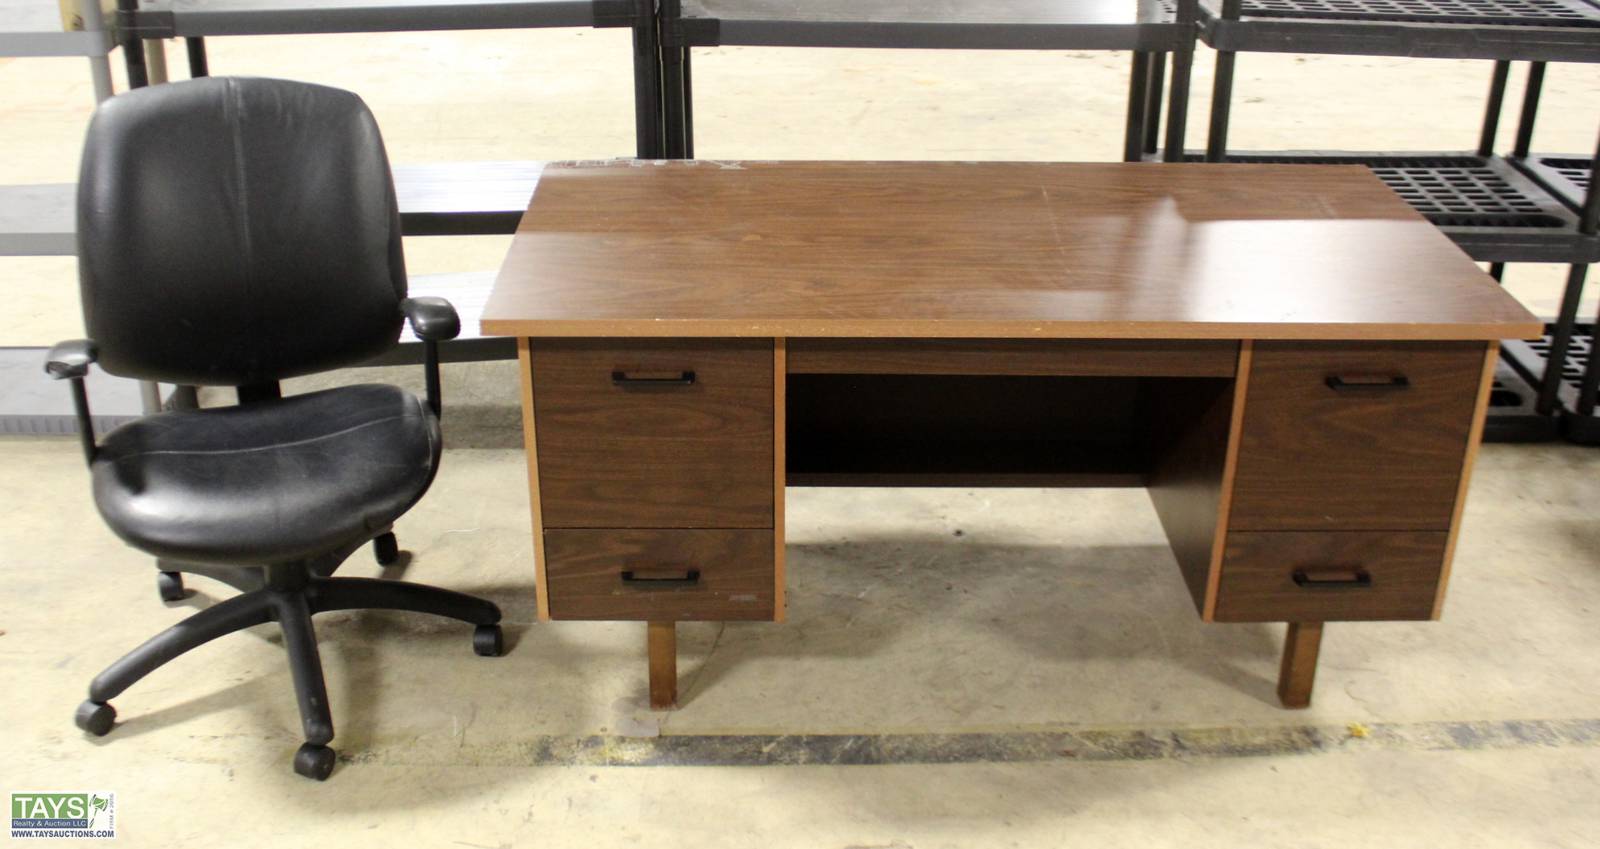 Tays Realty & Auction - Auction: ONLINE ABSOLUTE AUCTION: FURNITURE - HOME  DECOR - TOOLS ITEM: Wood Desk with Rolling Office Chair